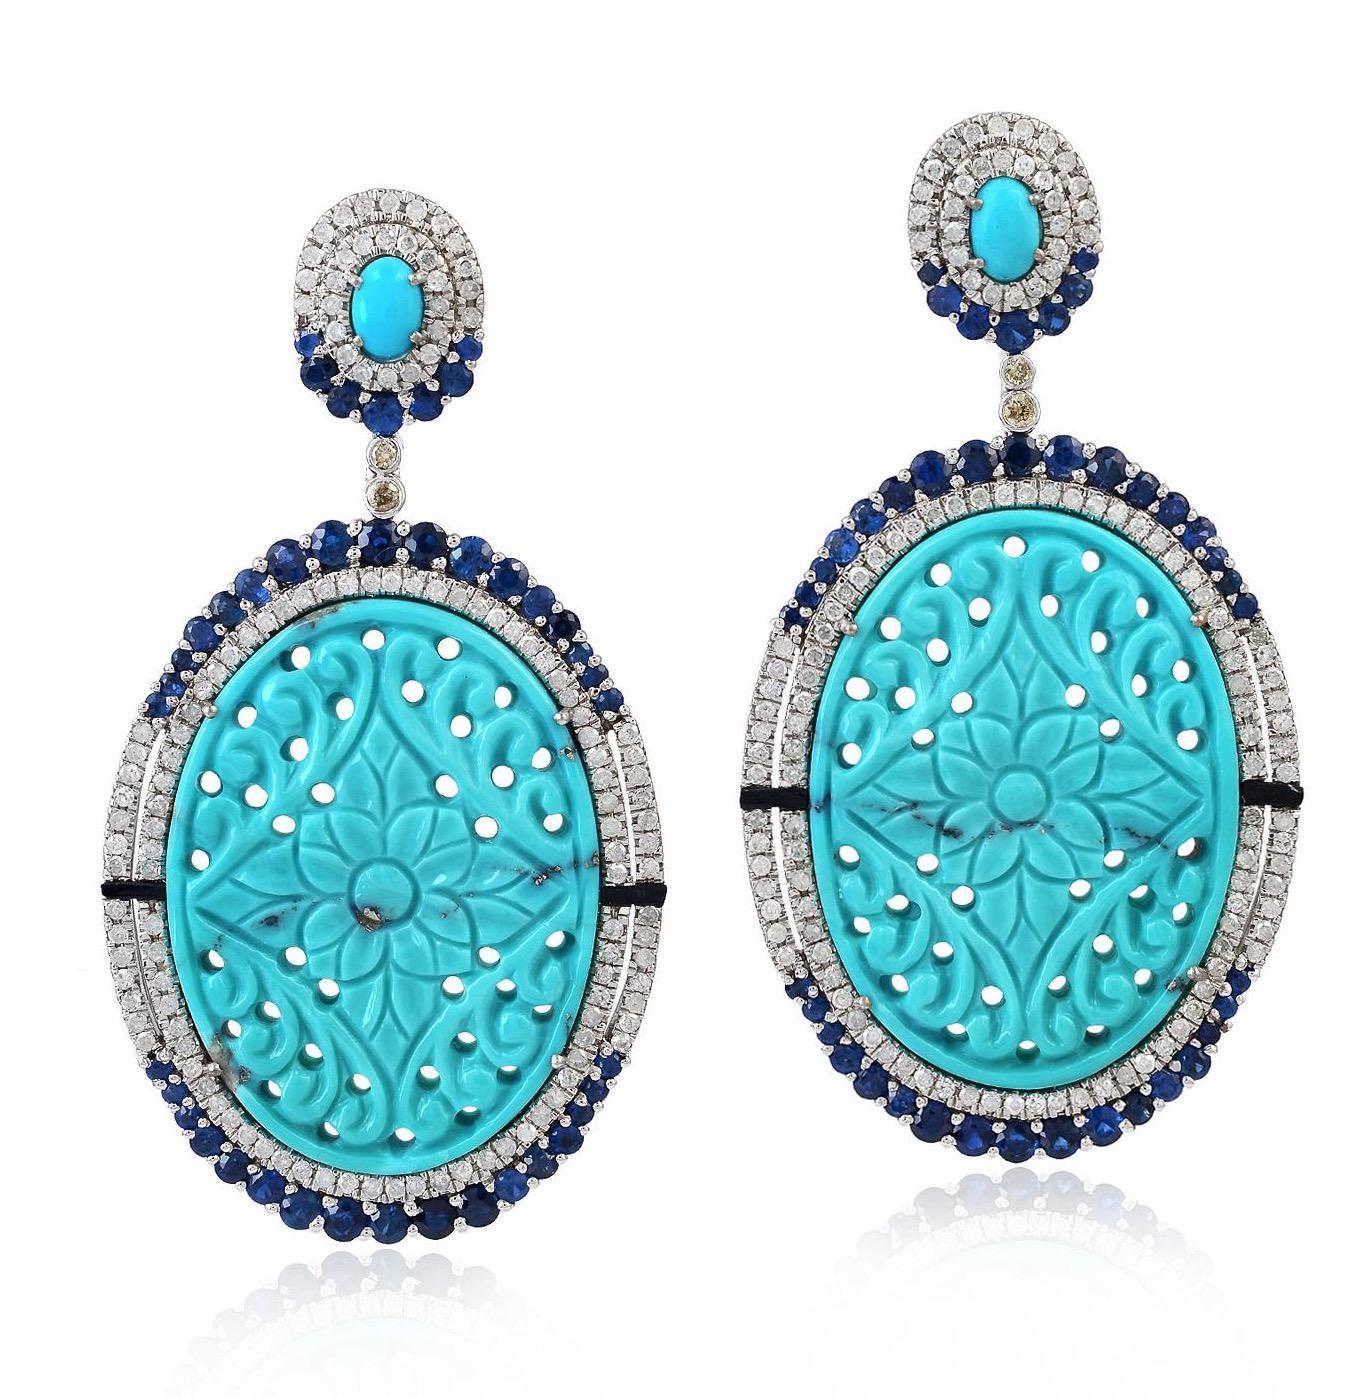 Oval Cut 45.05 Hand Carved Turquoise Sapphire Diamond Earrings For Sale